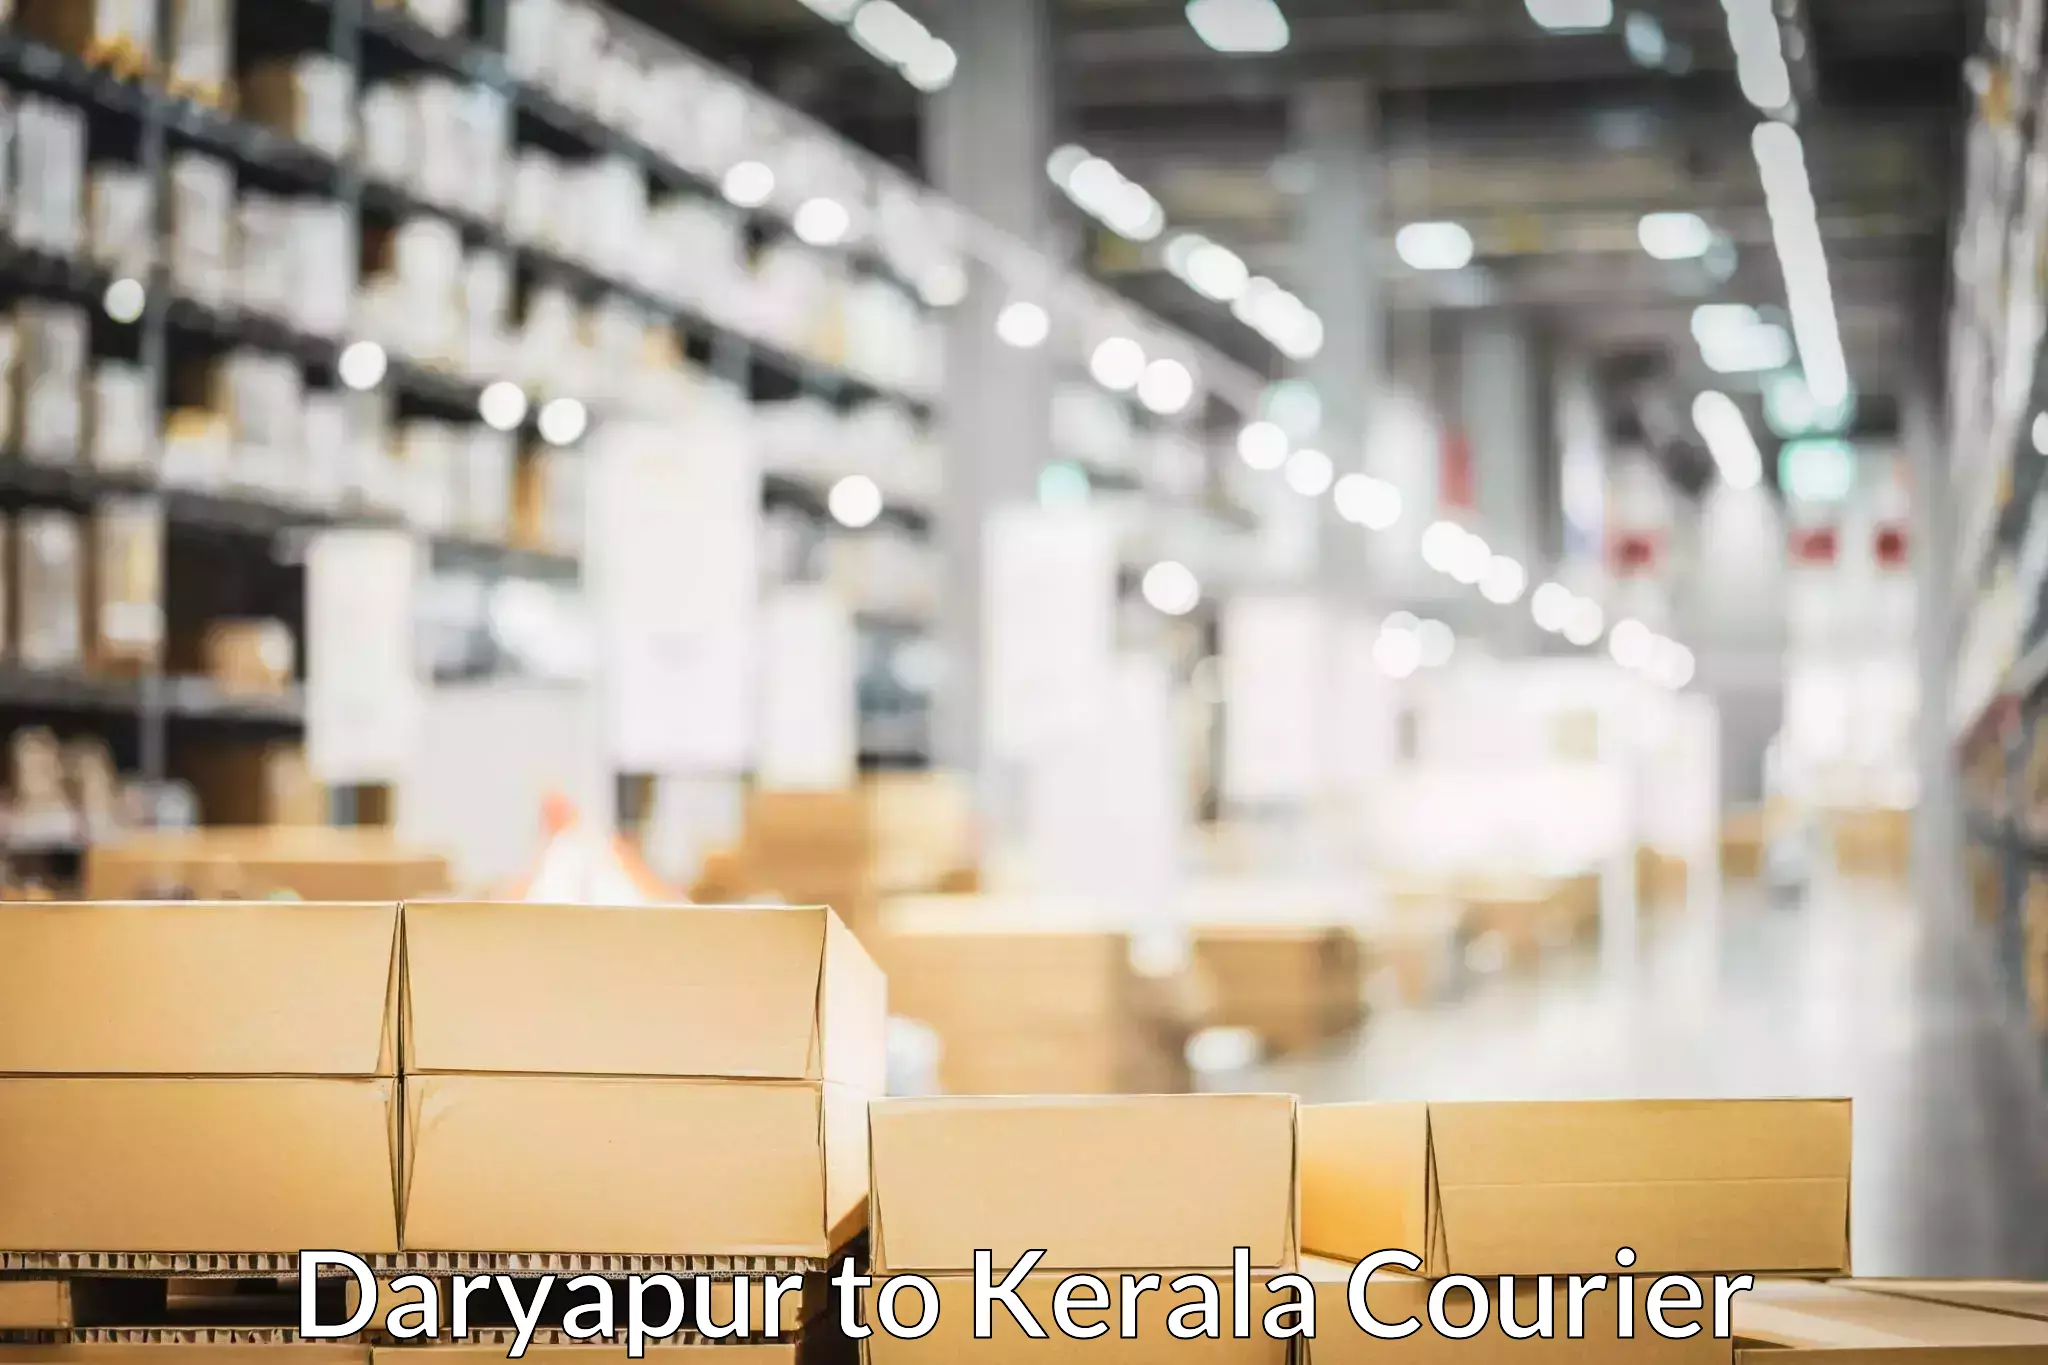 Furniture delivery service Daryapur to Kerala